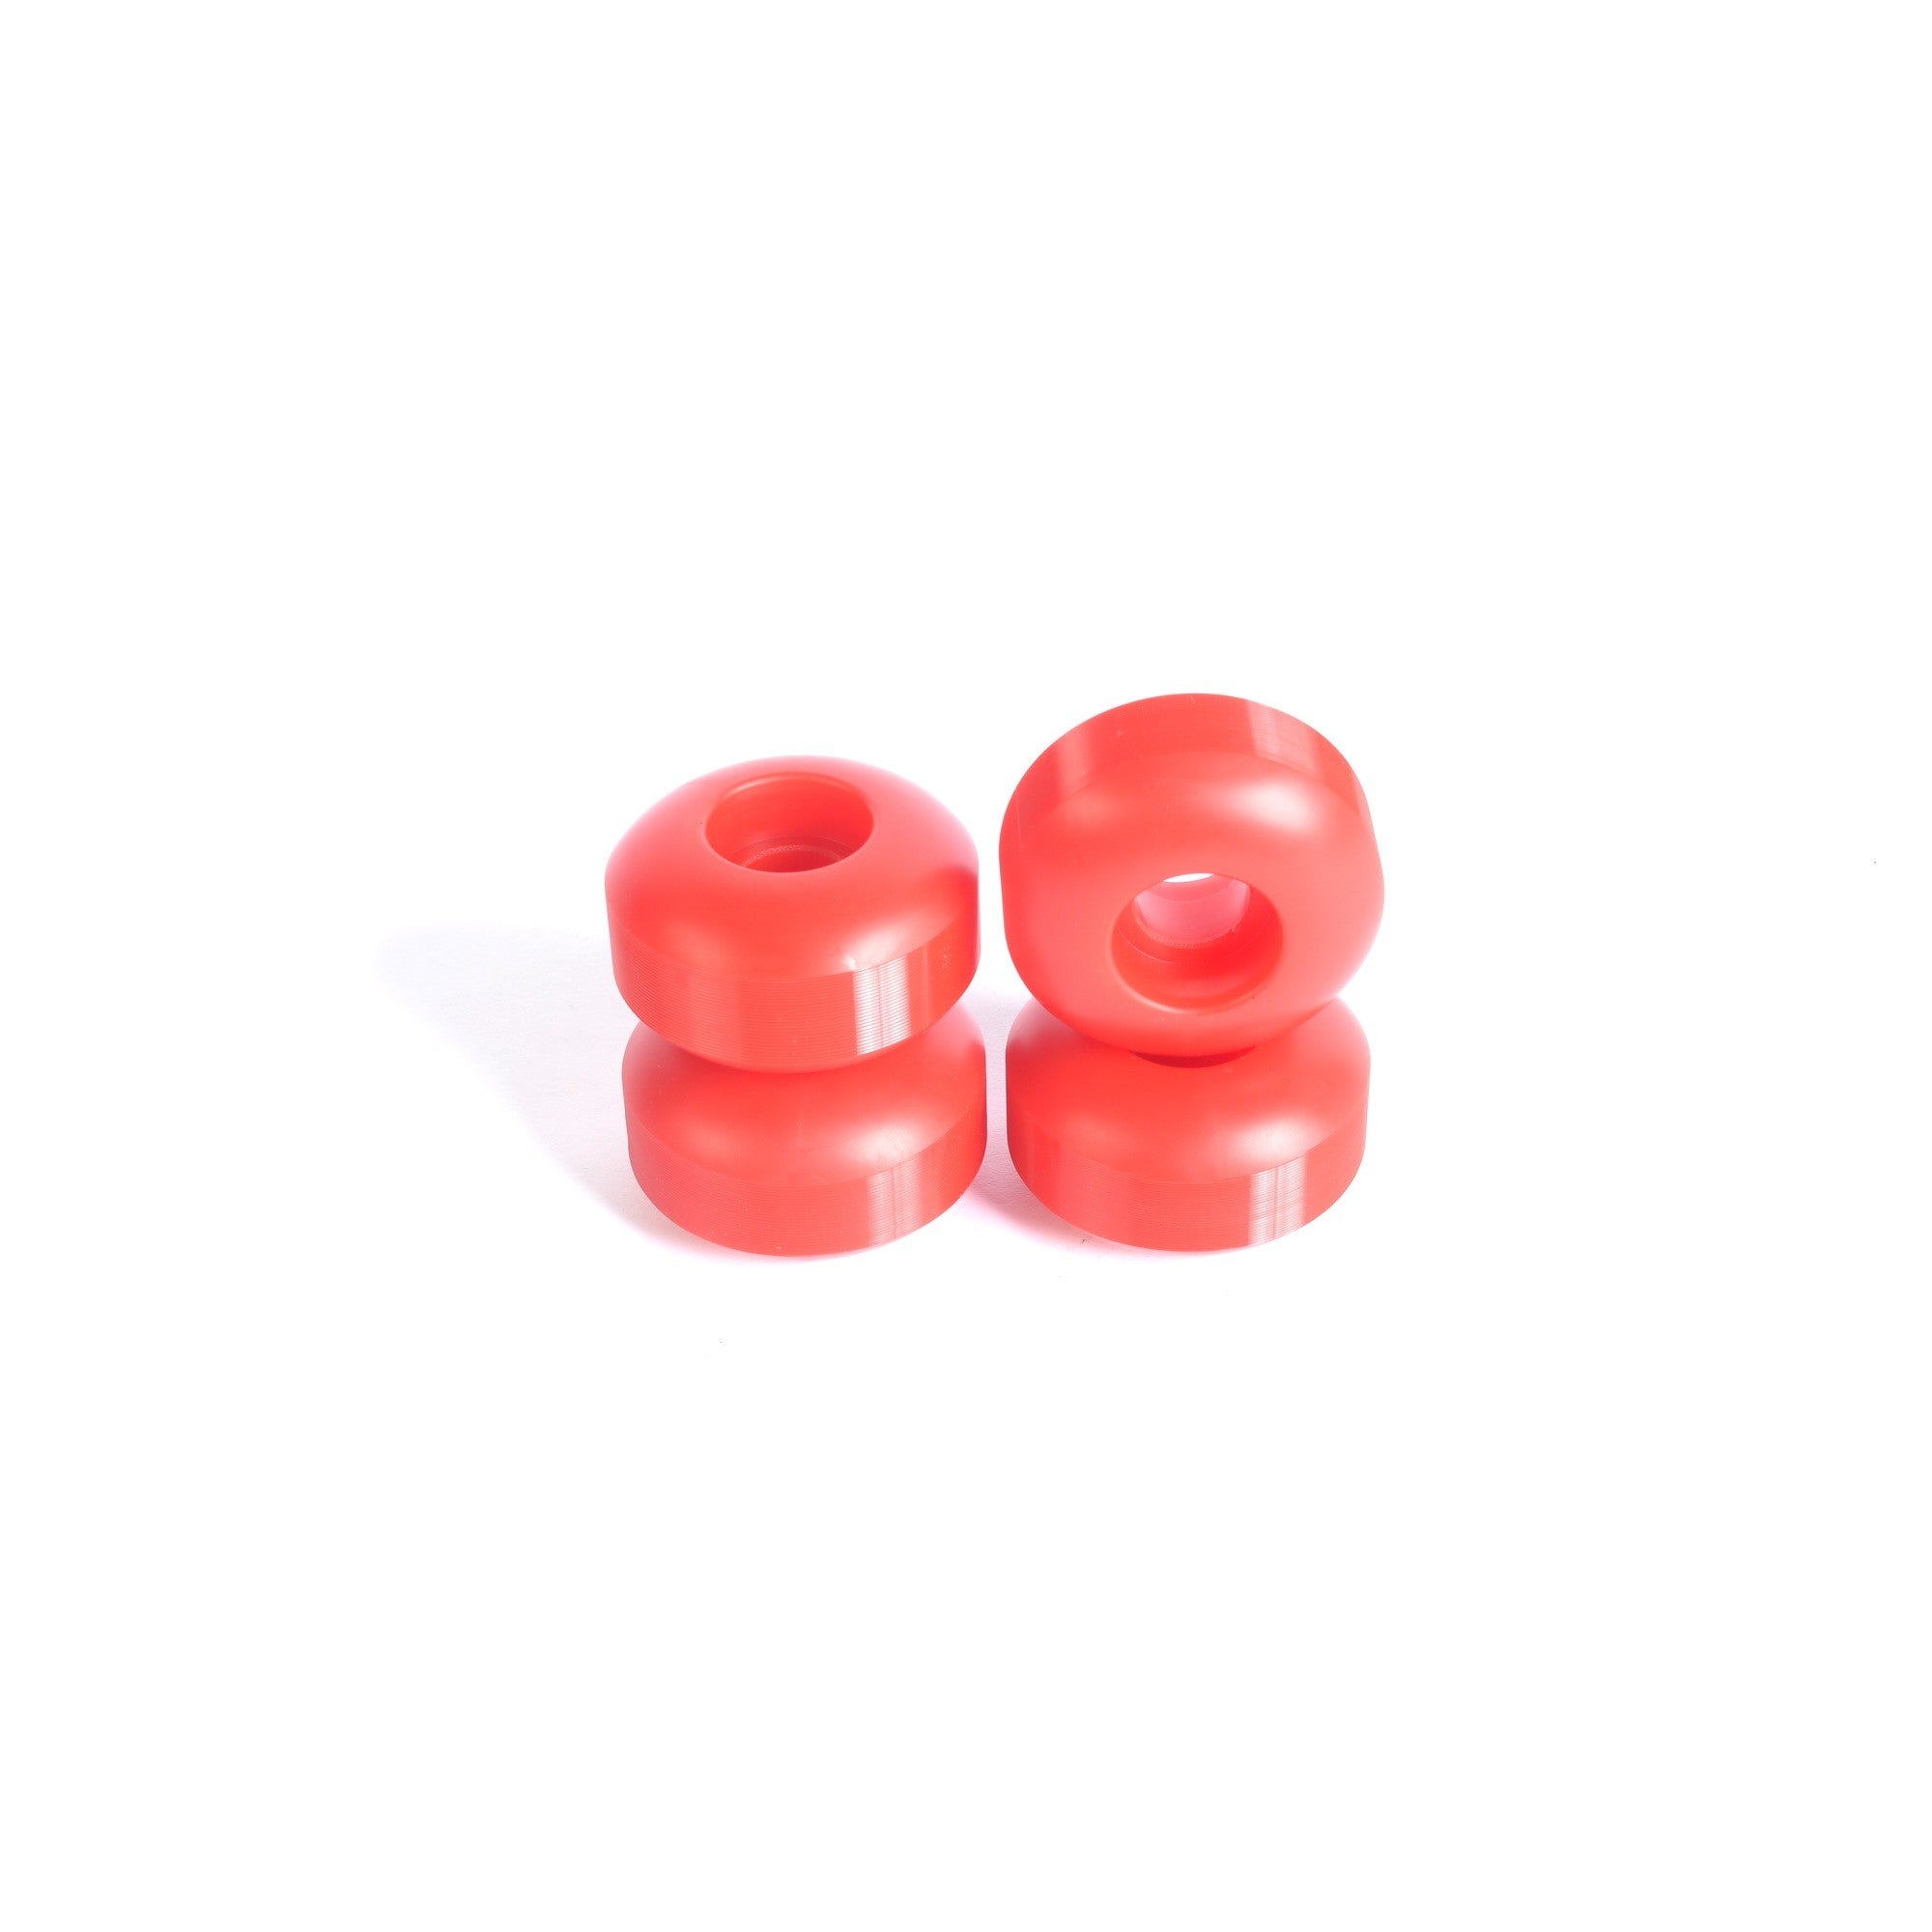 Skateboard wheels - YOCAHER 50x30mm 99a - Red